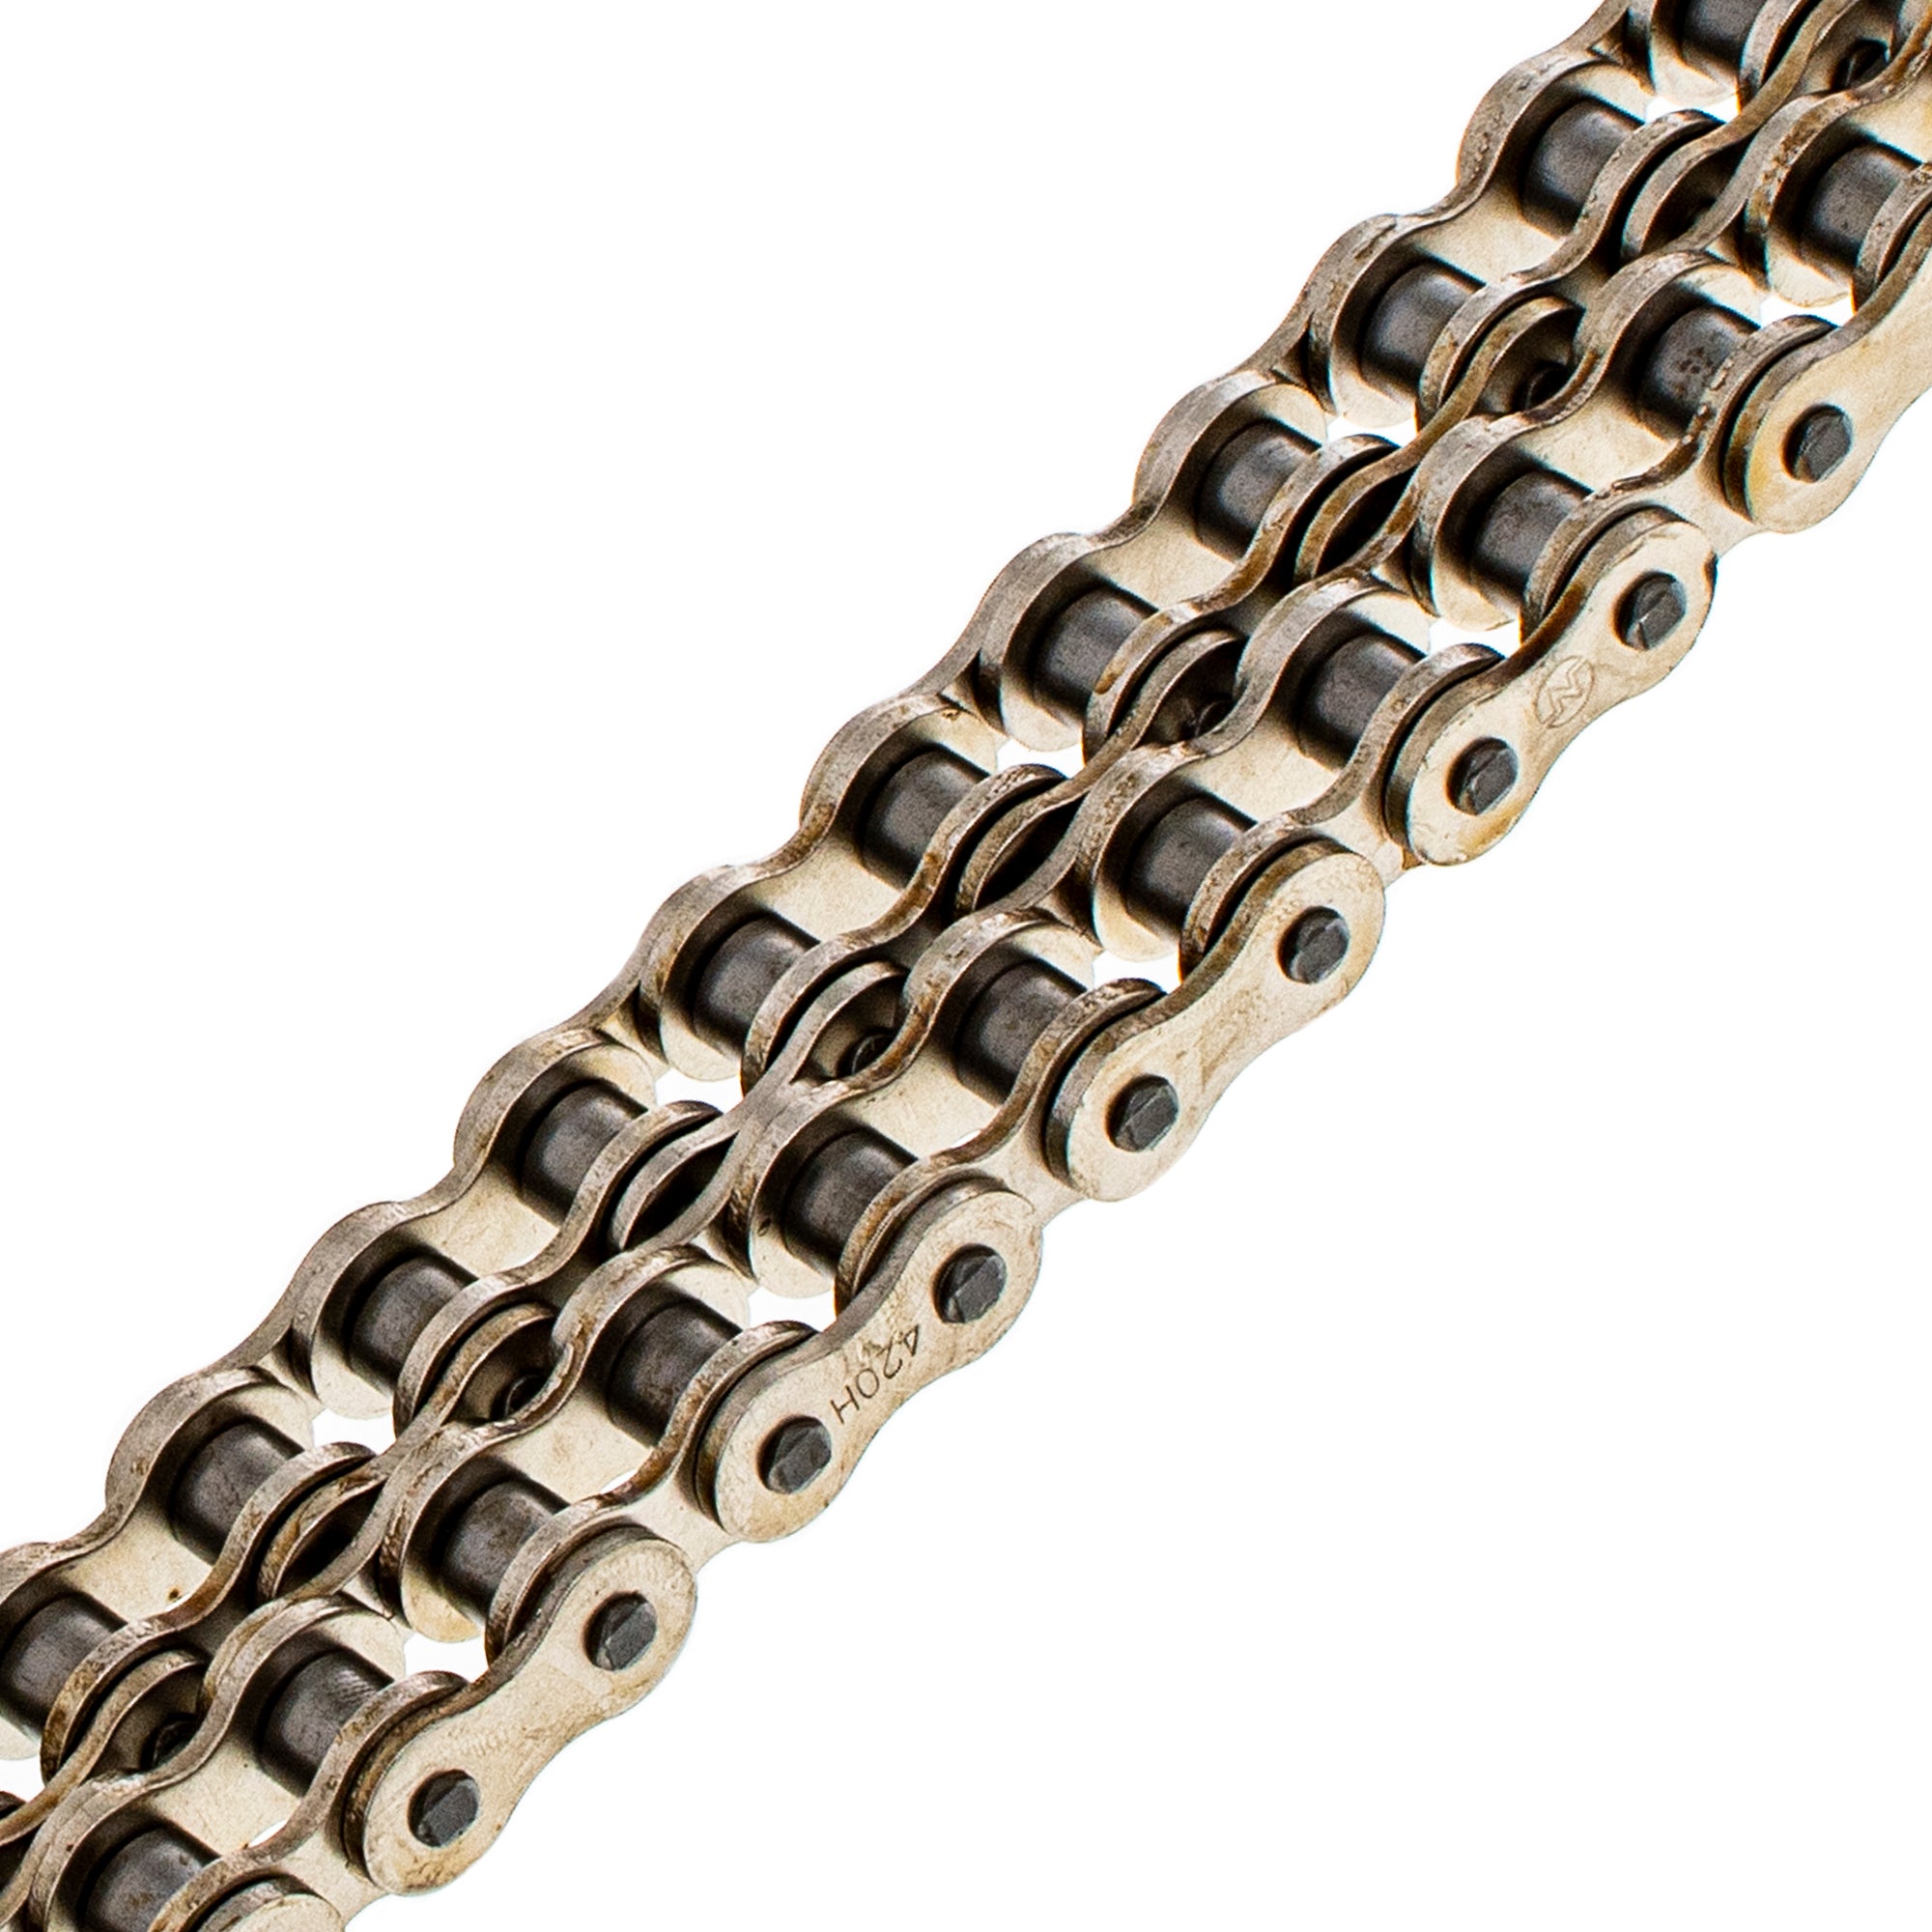 Drive Chain 112 Standard Non O-Ring w/ Master Link for zOTHER MTD Cub Cadet Troy-Bilt KTM NICHE 519-CDC2276H